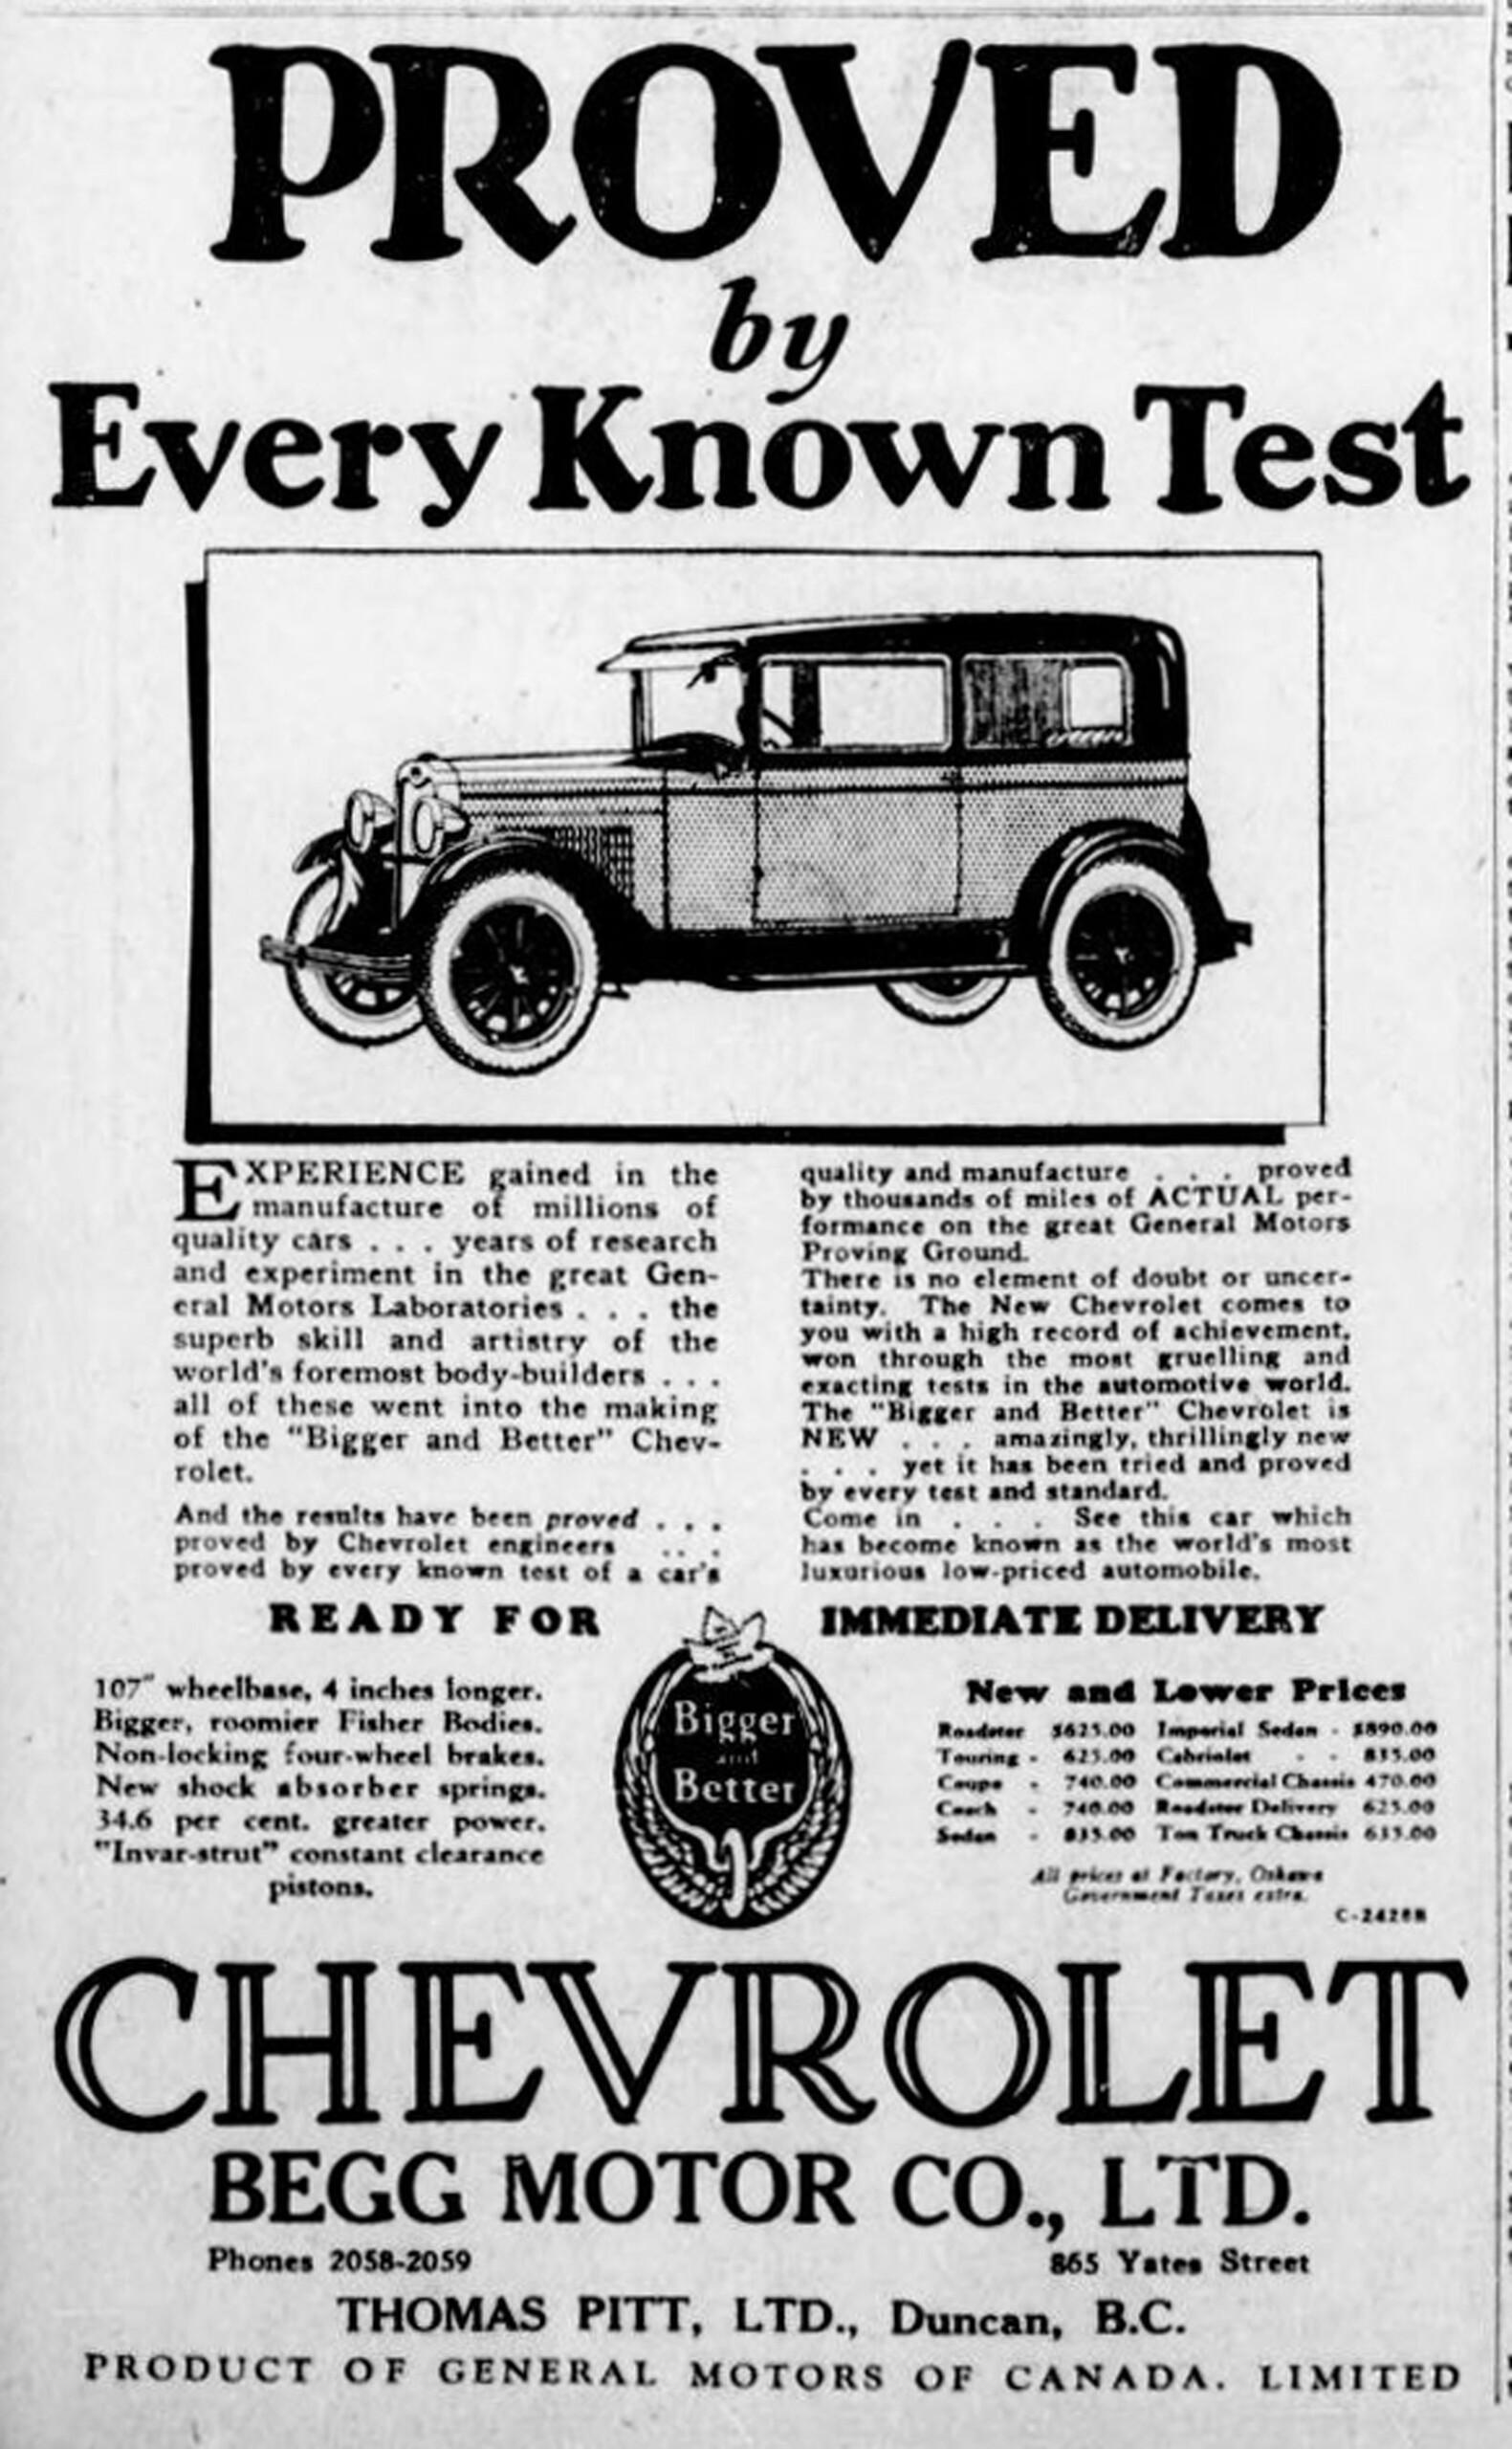 1928 advertisement for Chevrolet by Begg Motor Company, 865 Yates Street. (Victoria Online Sightseeing collection)